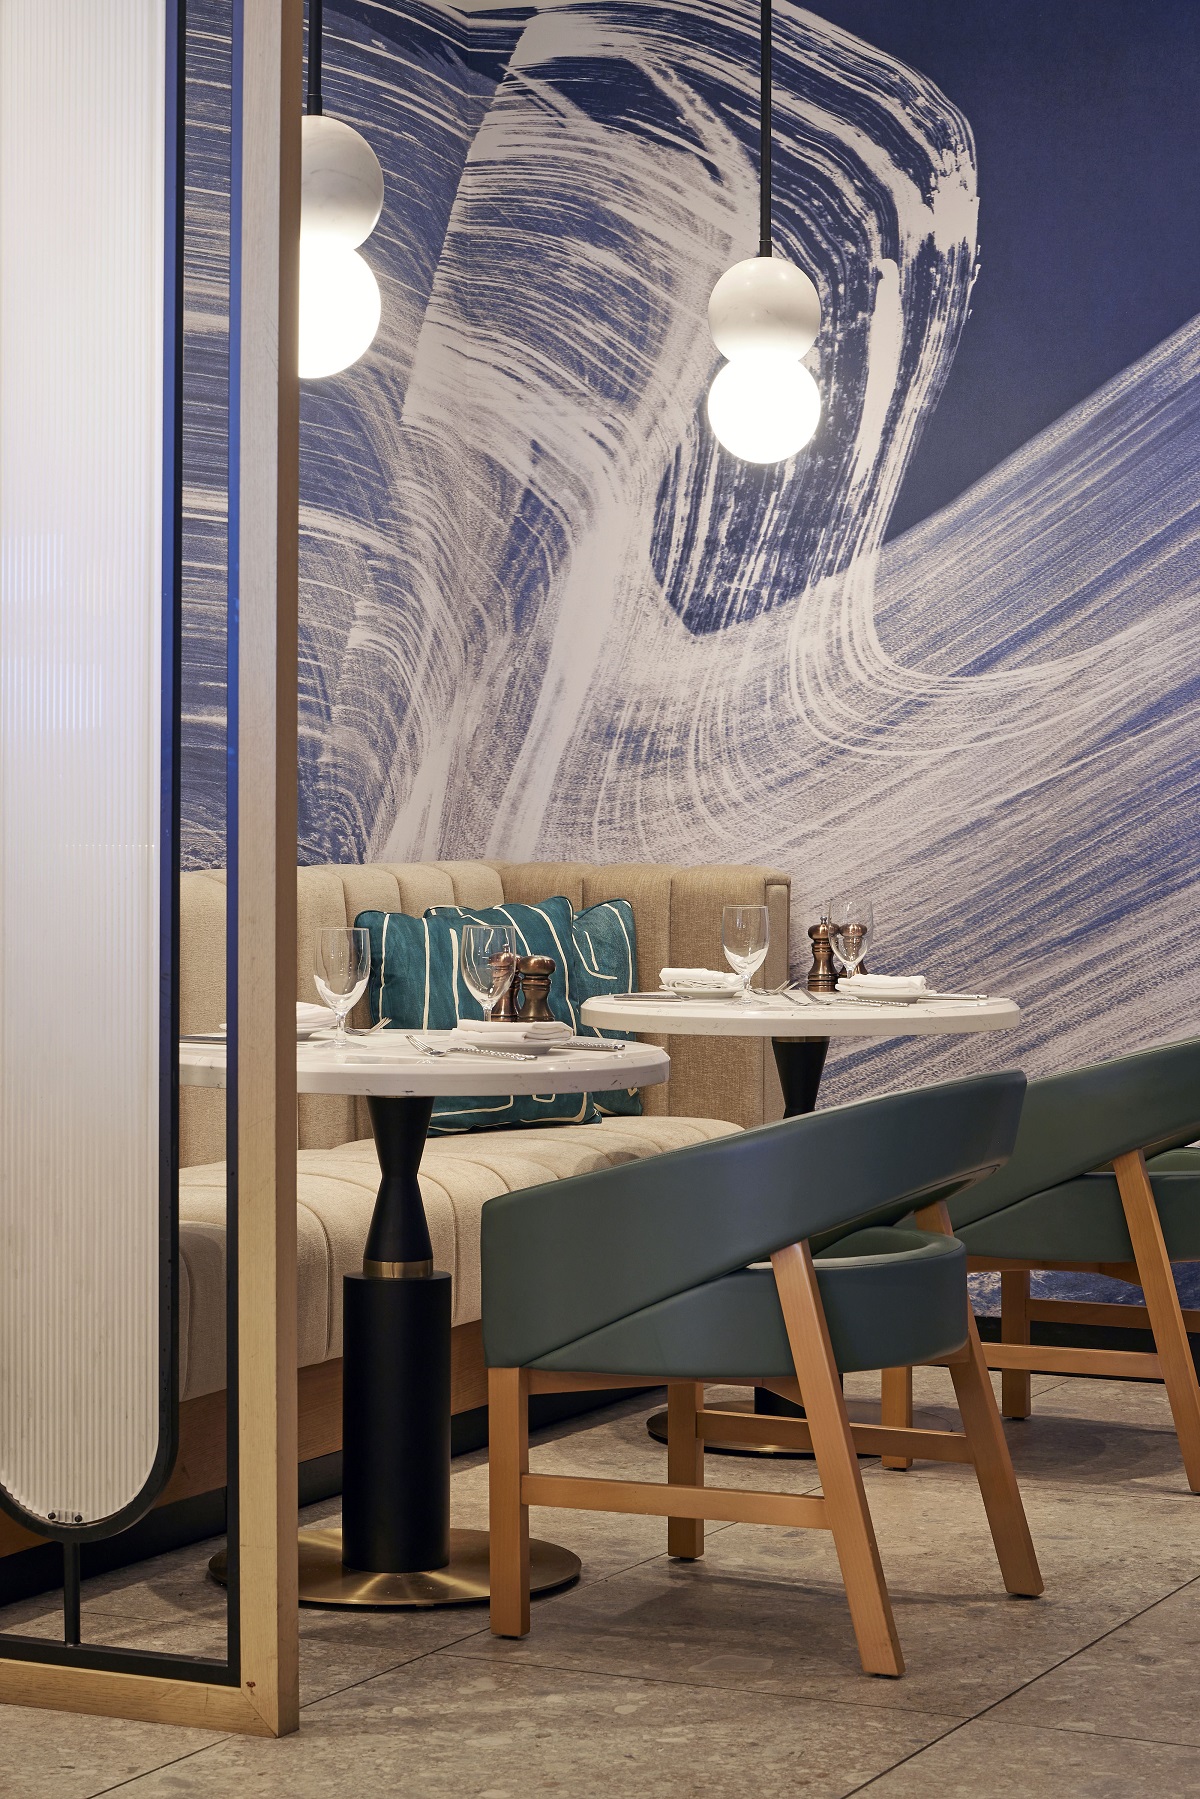 restaurant seating in cubicles with abstract wave like wall painting behind